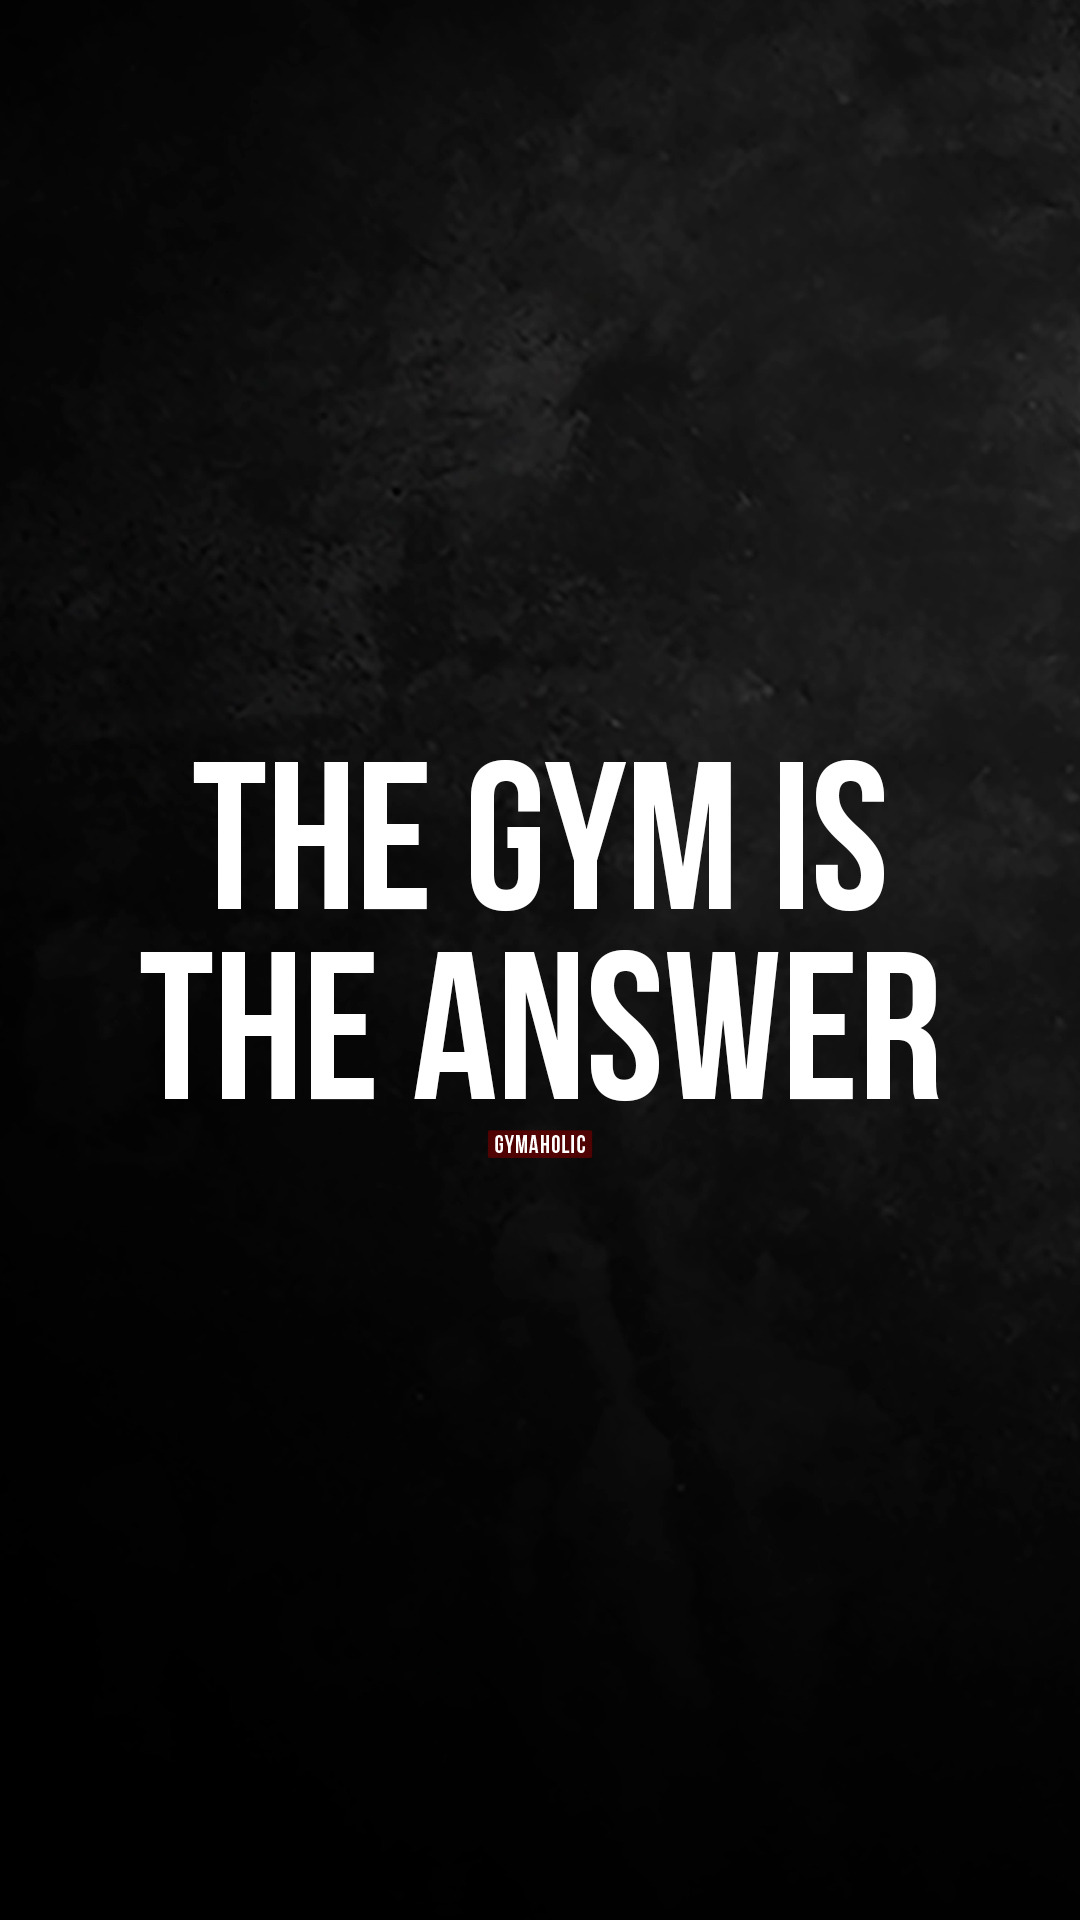 The gym is the answer